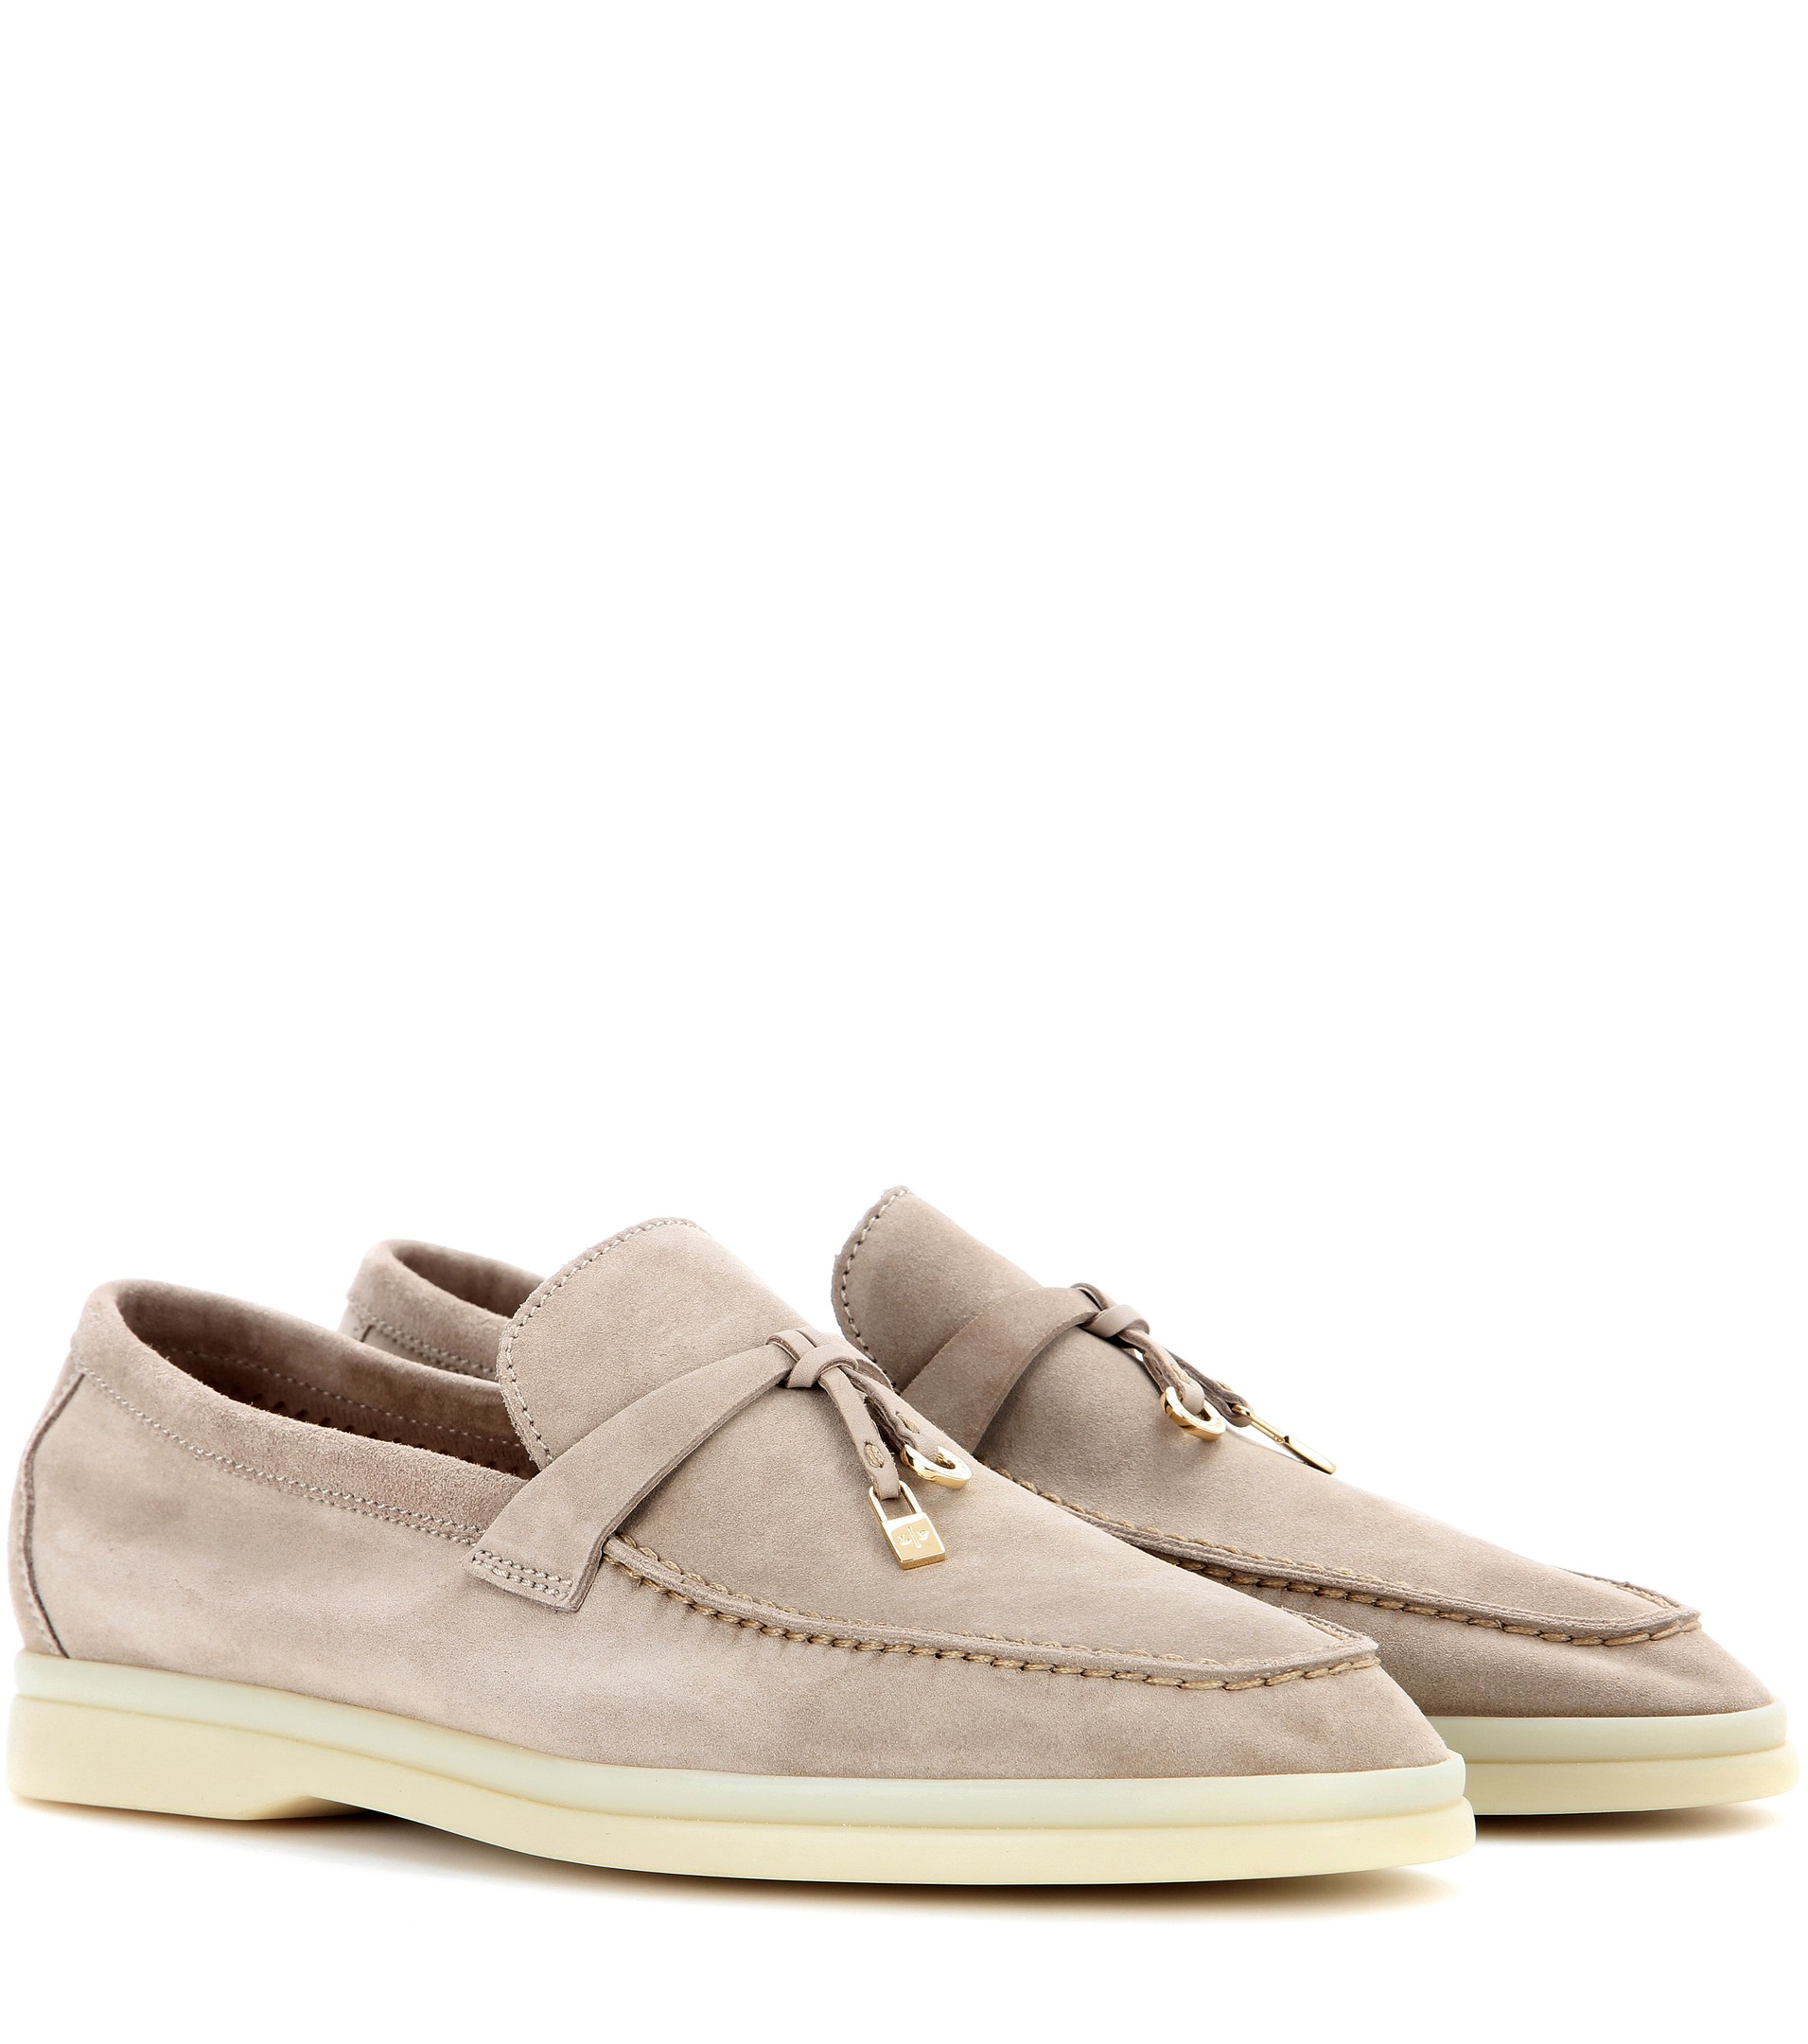 Loro Piana Summer Charms Walk Suede Loafers in Natural - Lyst